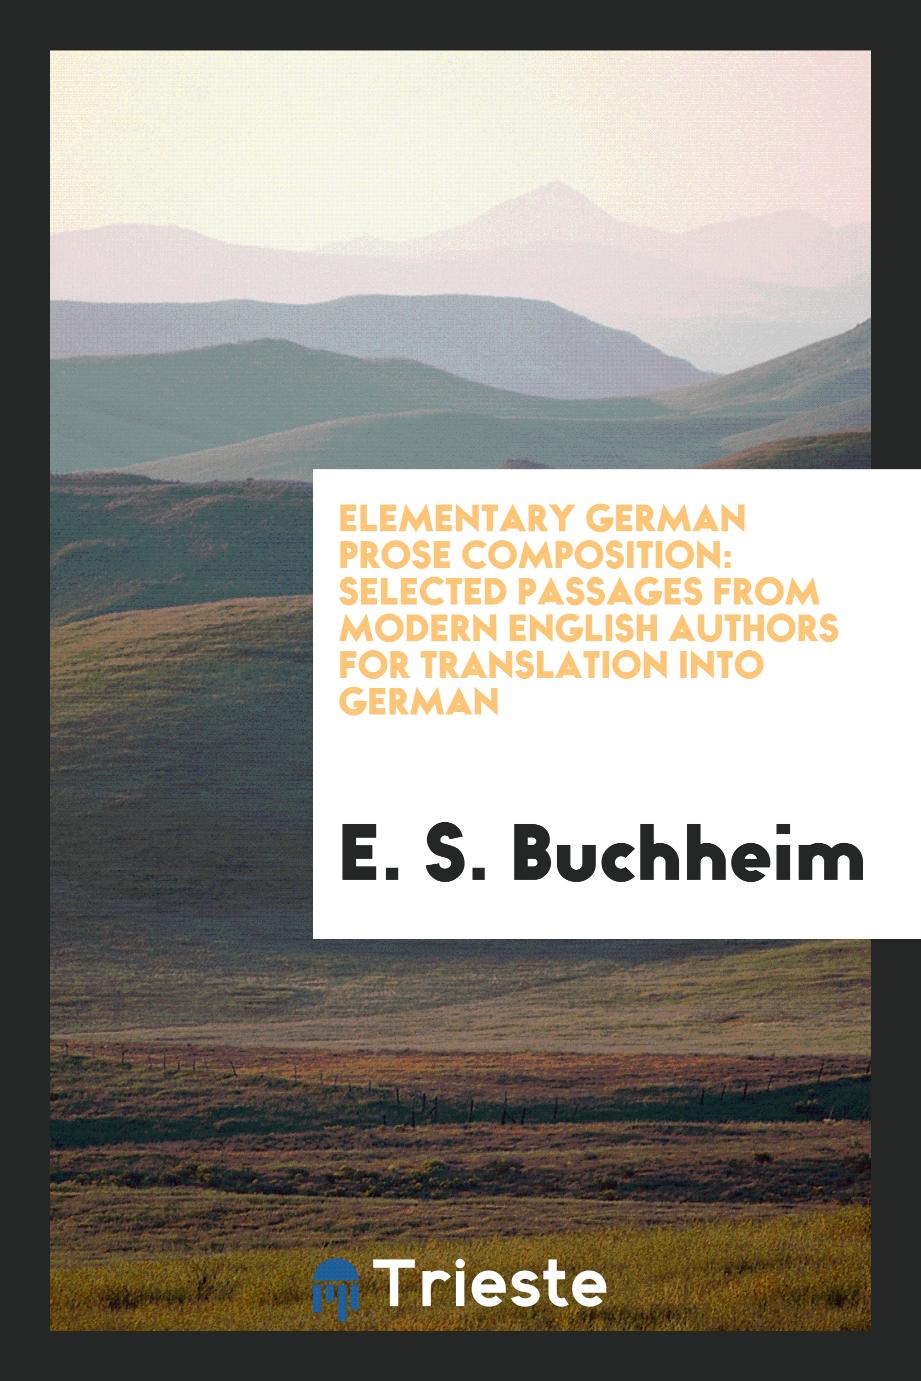 Elementary German Prose Composition: Selected Passages from Modern English Authors for Translation into German